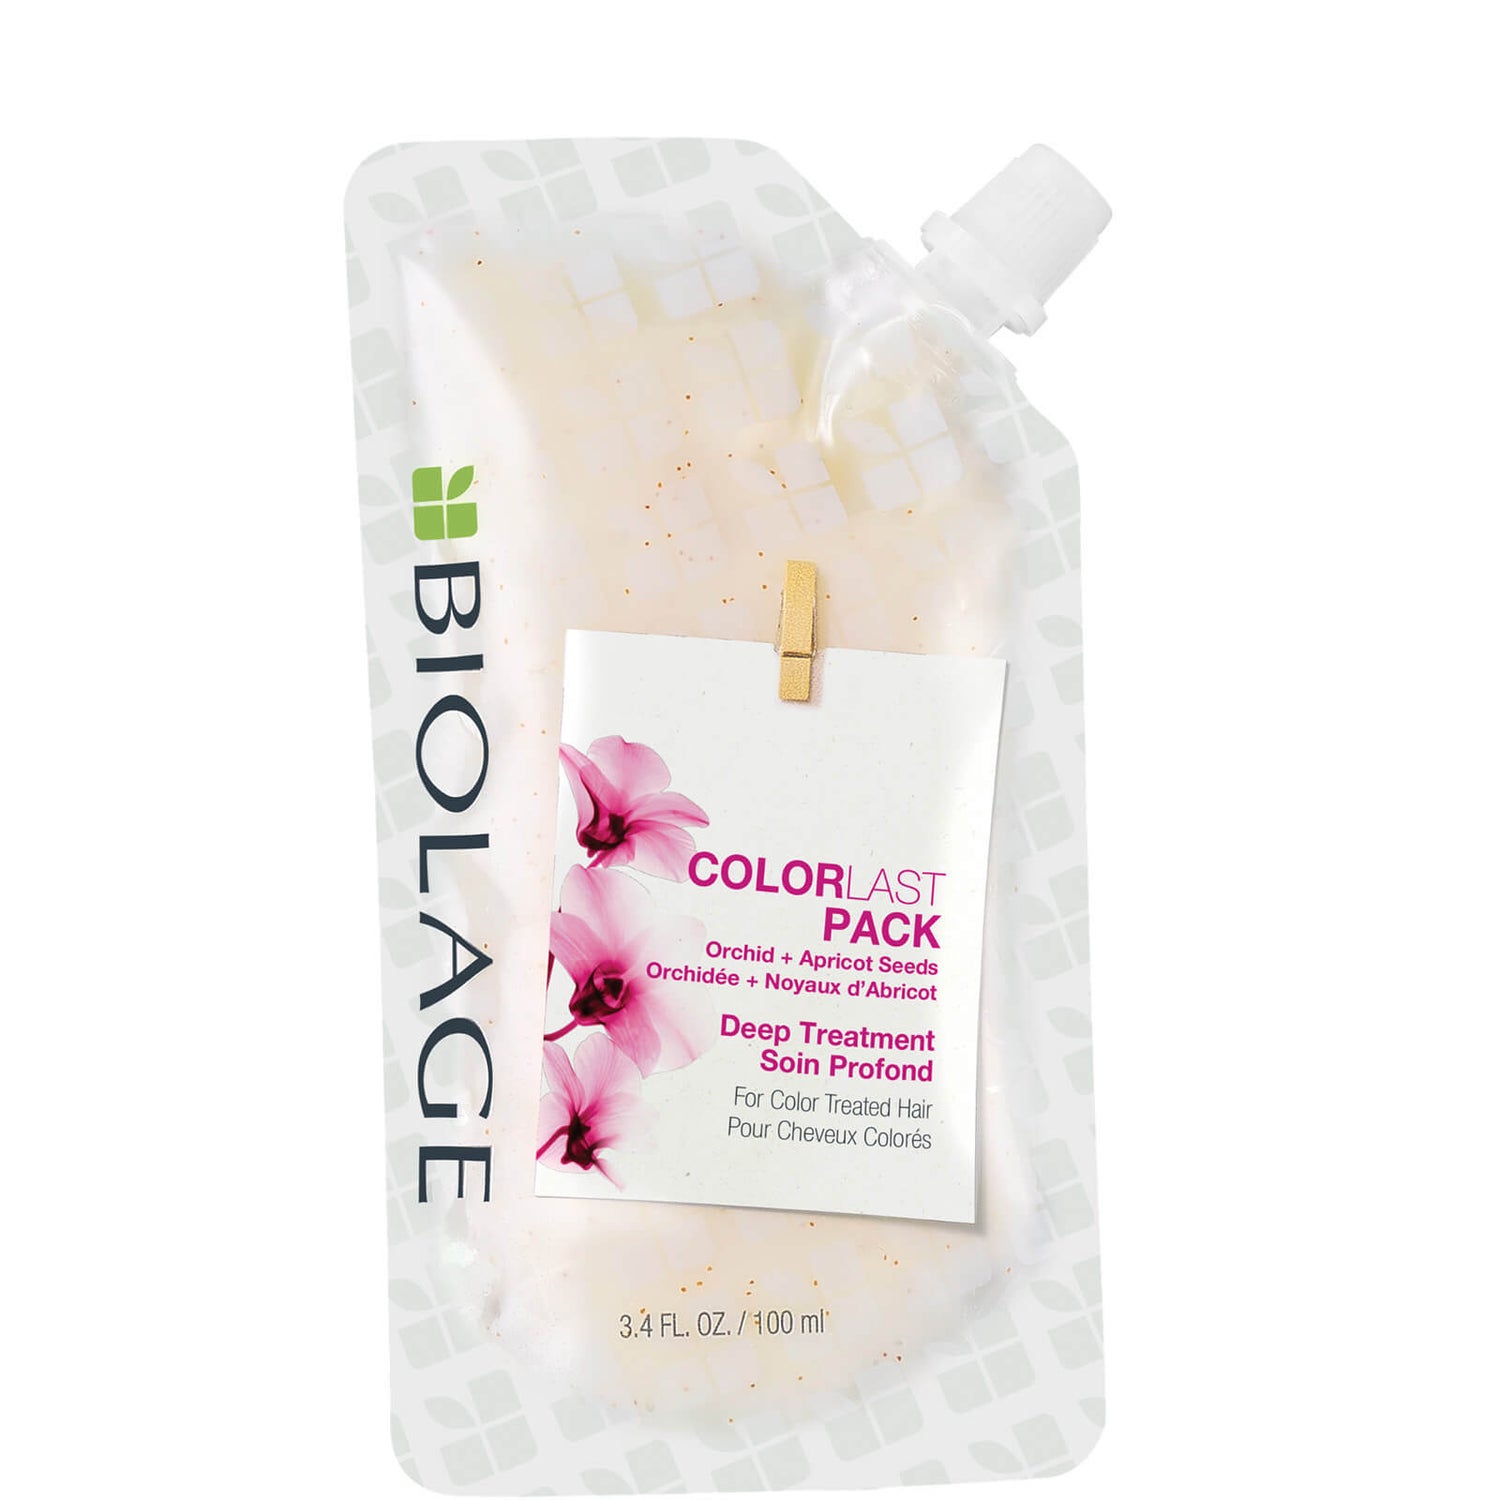 Biolage ColorLast Coloured Hair Mask Deep Treatment Pack Colour Protect Mask for Coloured Hair 100ml